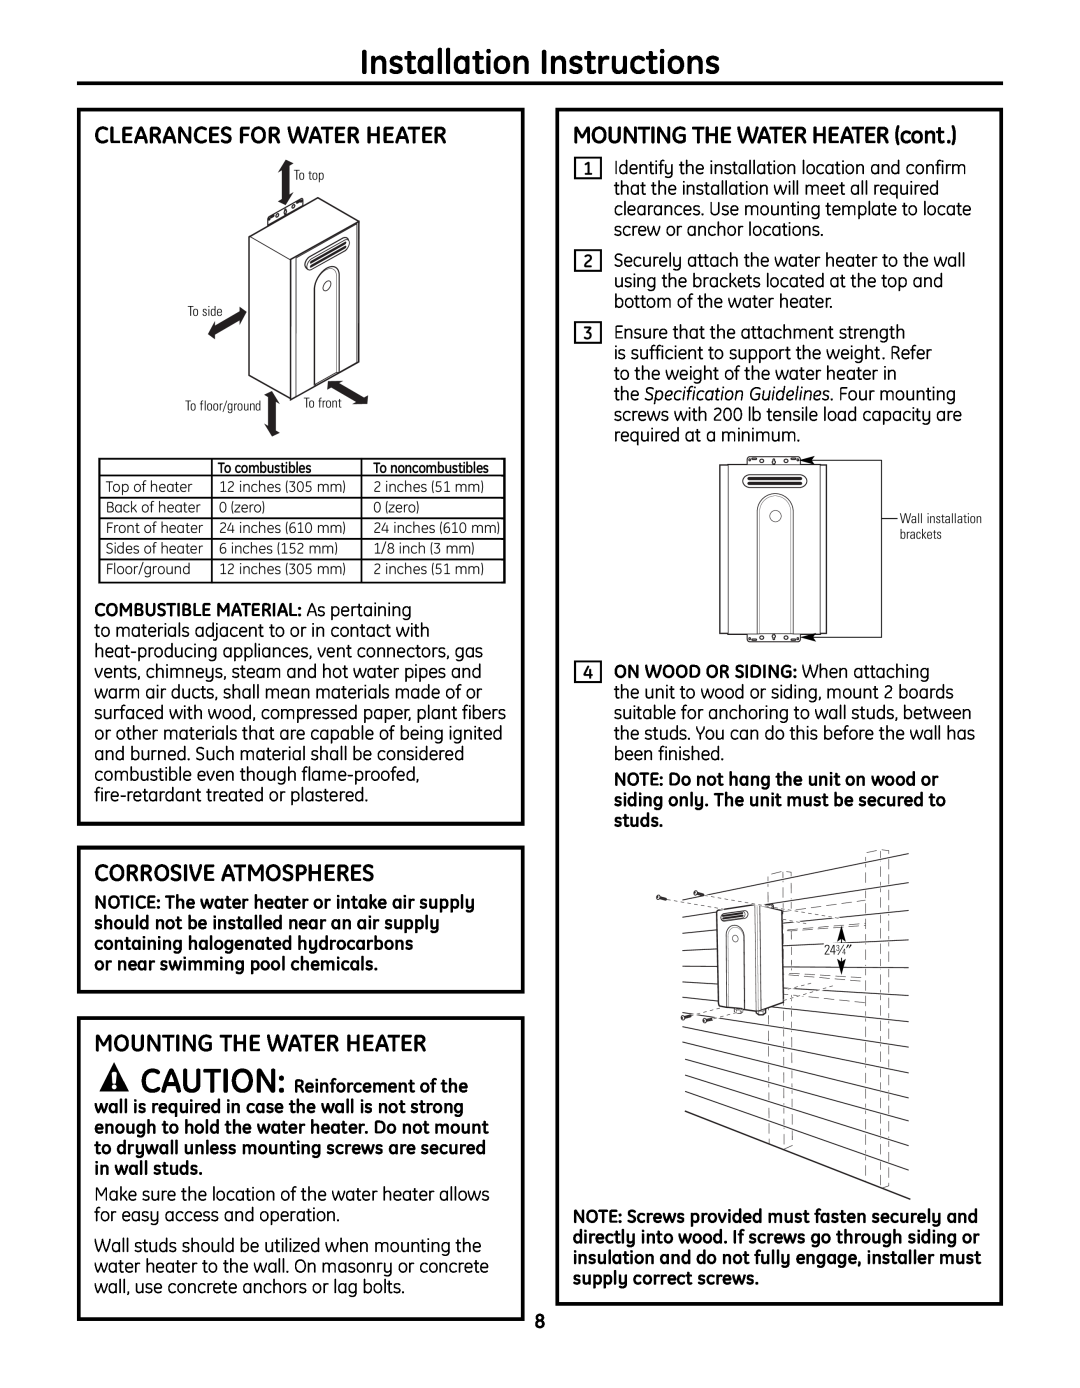 GE GN75ENSRSA Clearances For Water Heater, Corrosive Atmospheres, Mounting The Water Heater, Installation Instructions 